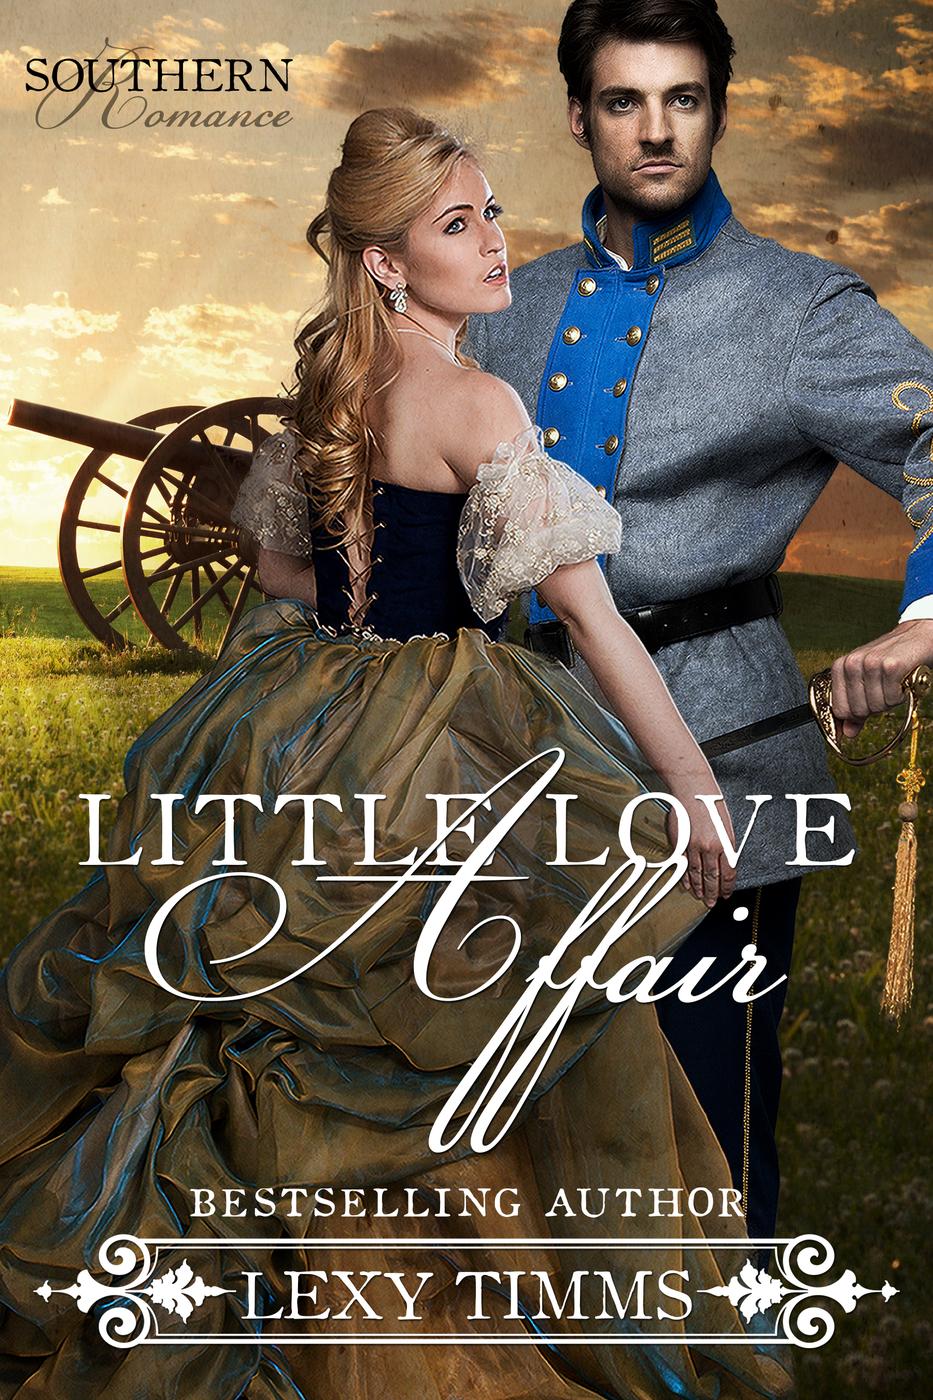 Little Love Affair (Southern Romance Series, #1) (2015) by Lexy Timms